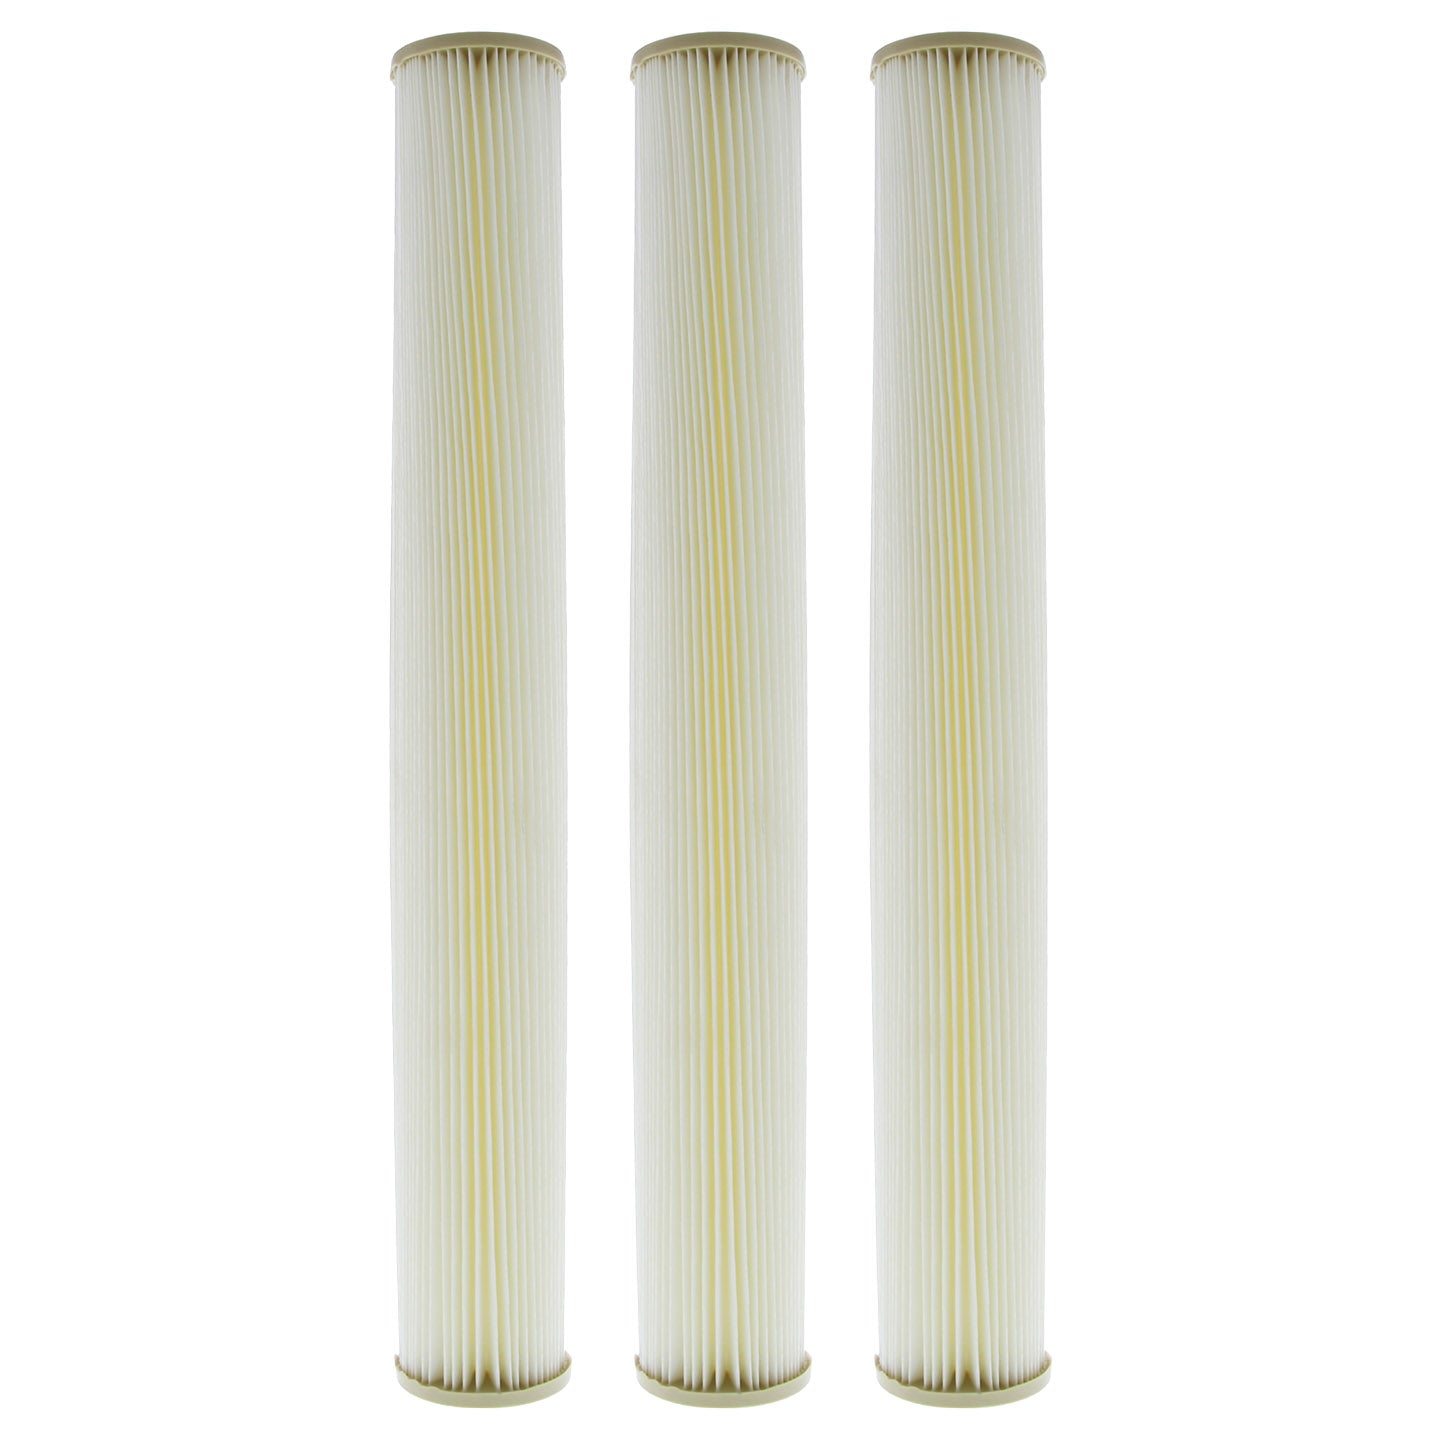 Pentek ECP1-20 Pleated Sediment Water Filters (20-inch x 2-5/8-inch)